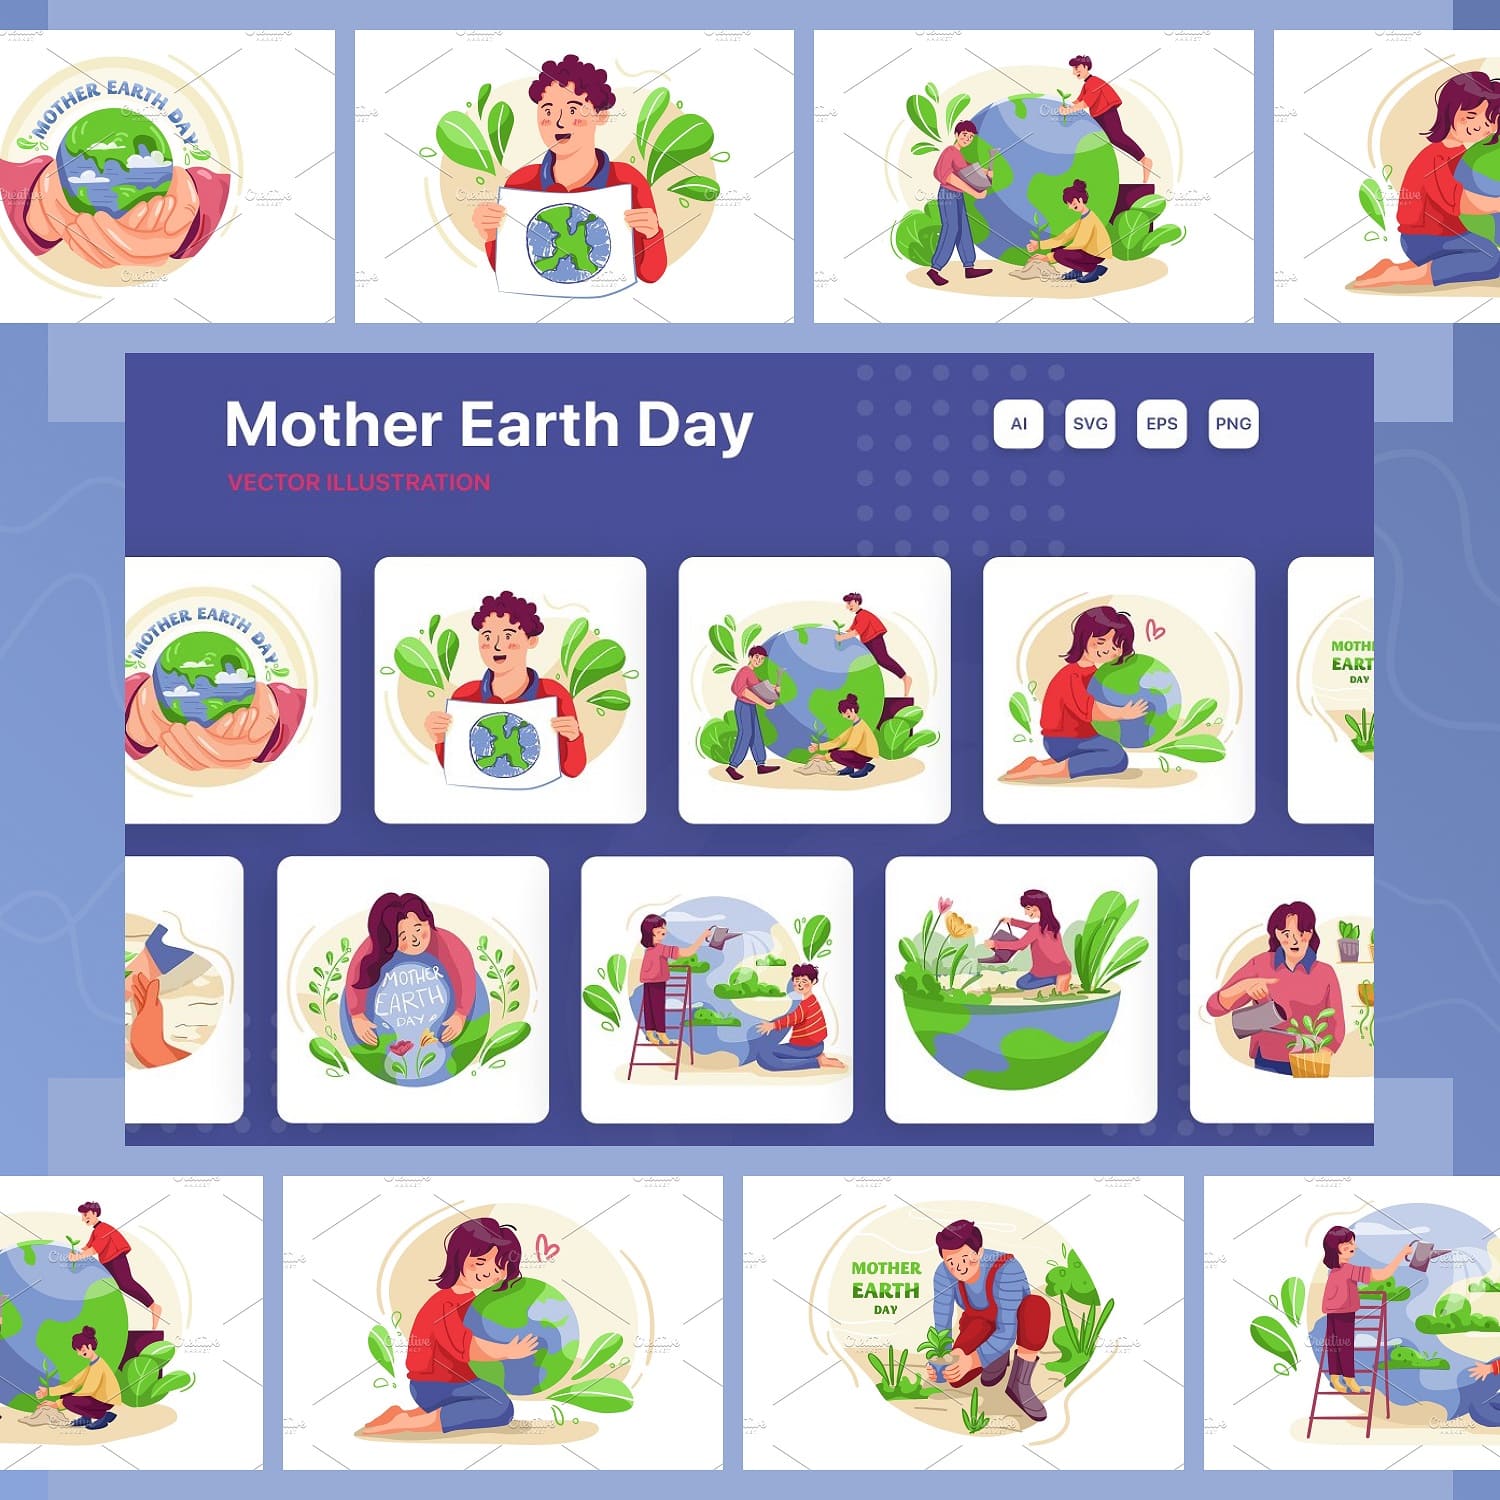 On a blue background, several square images for Mother Earth Day.